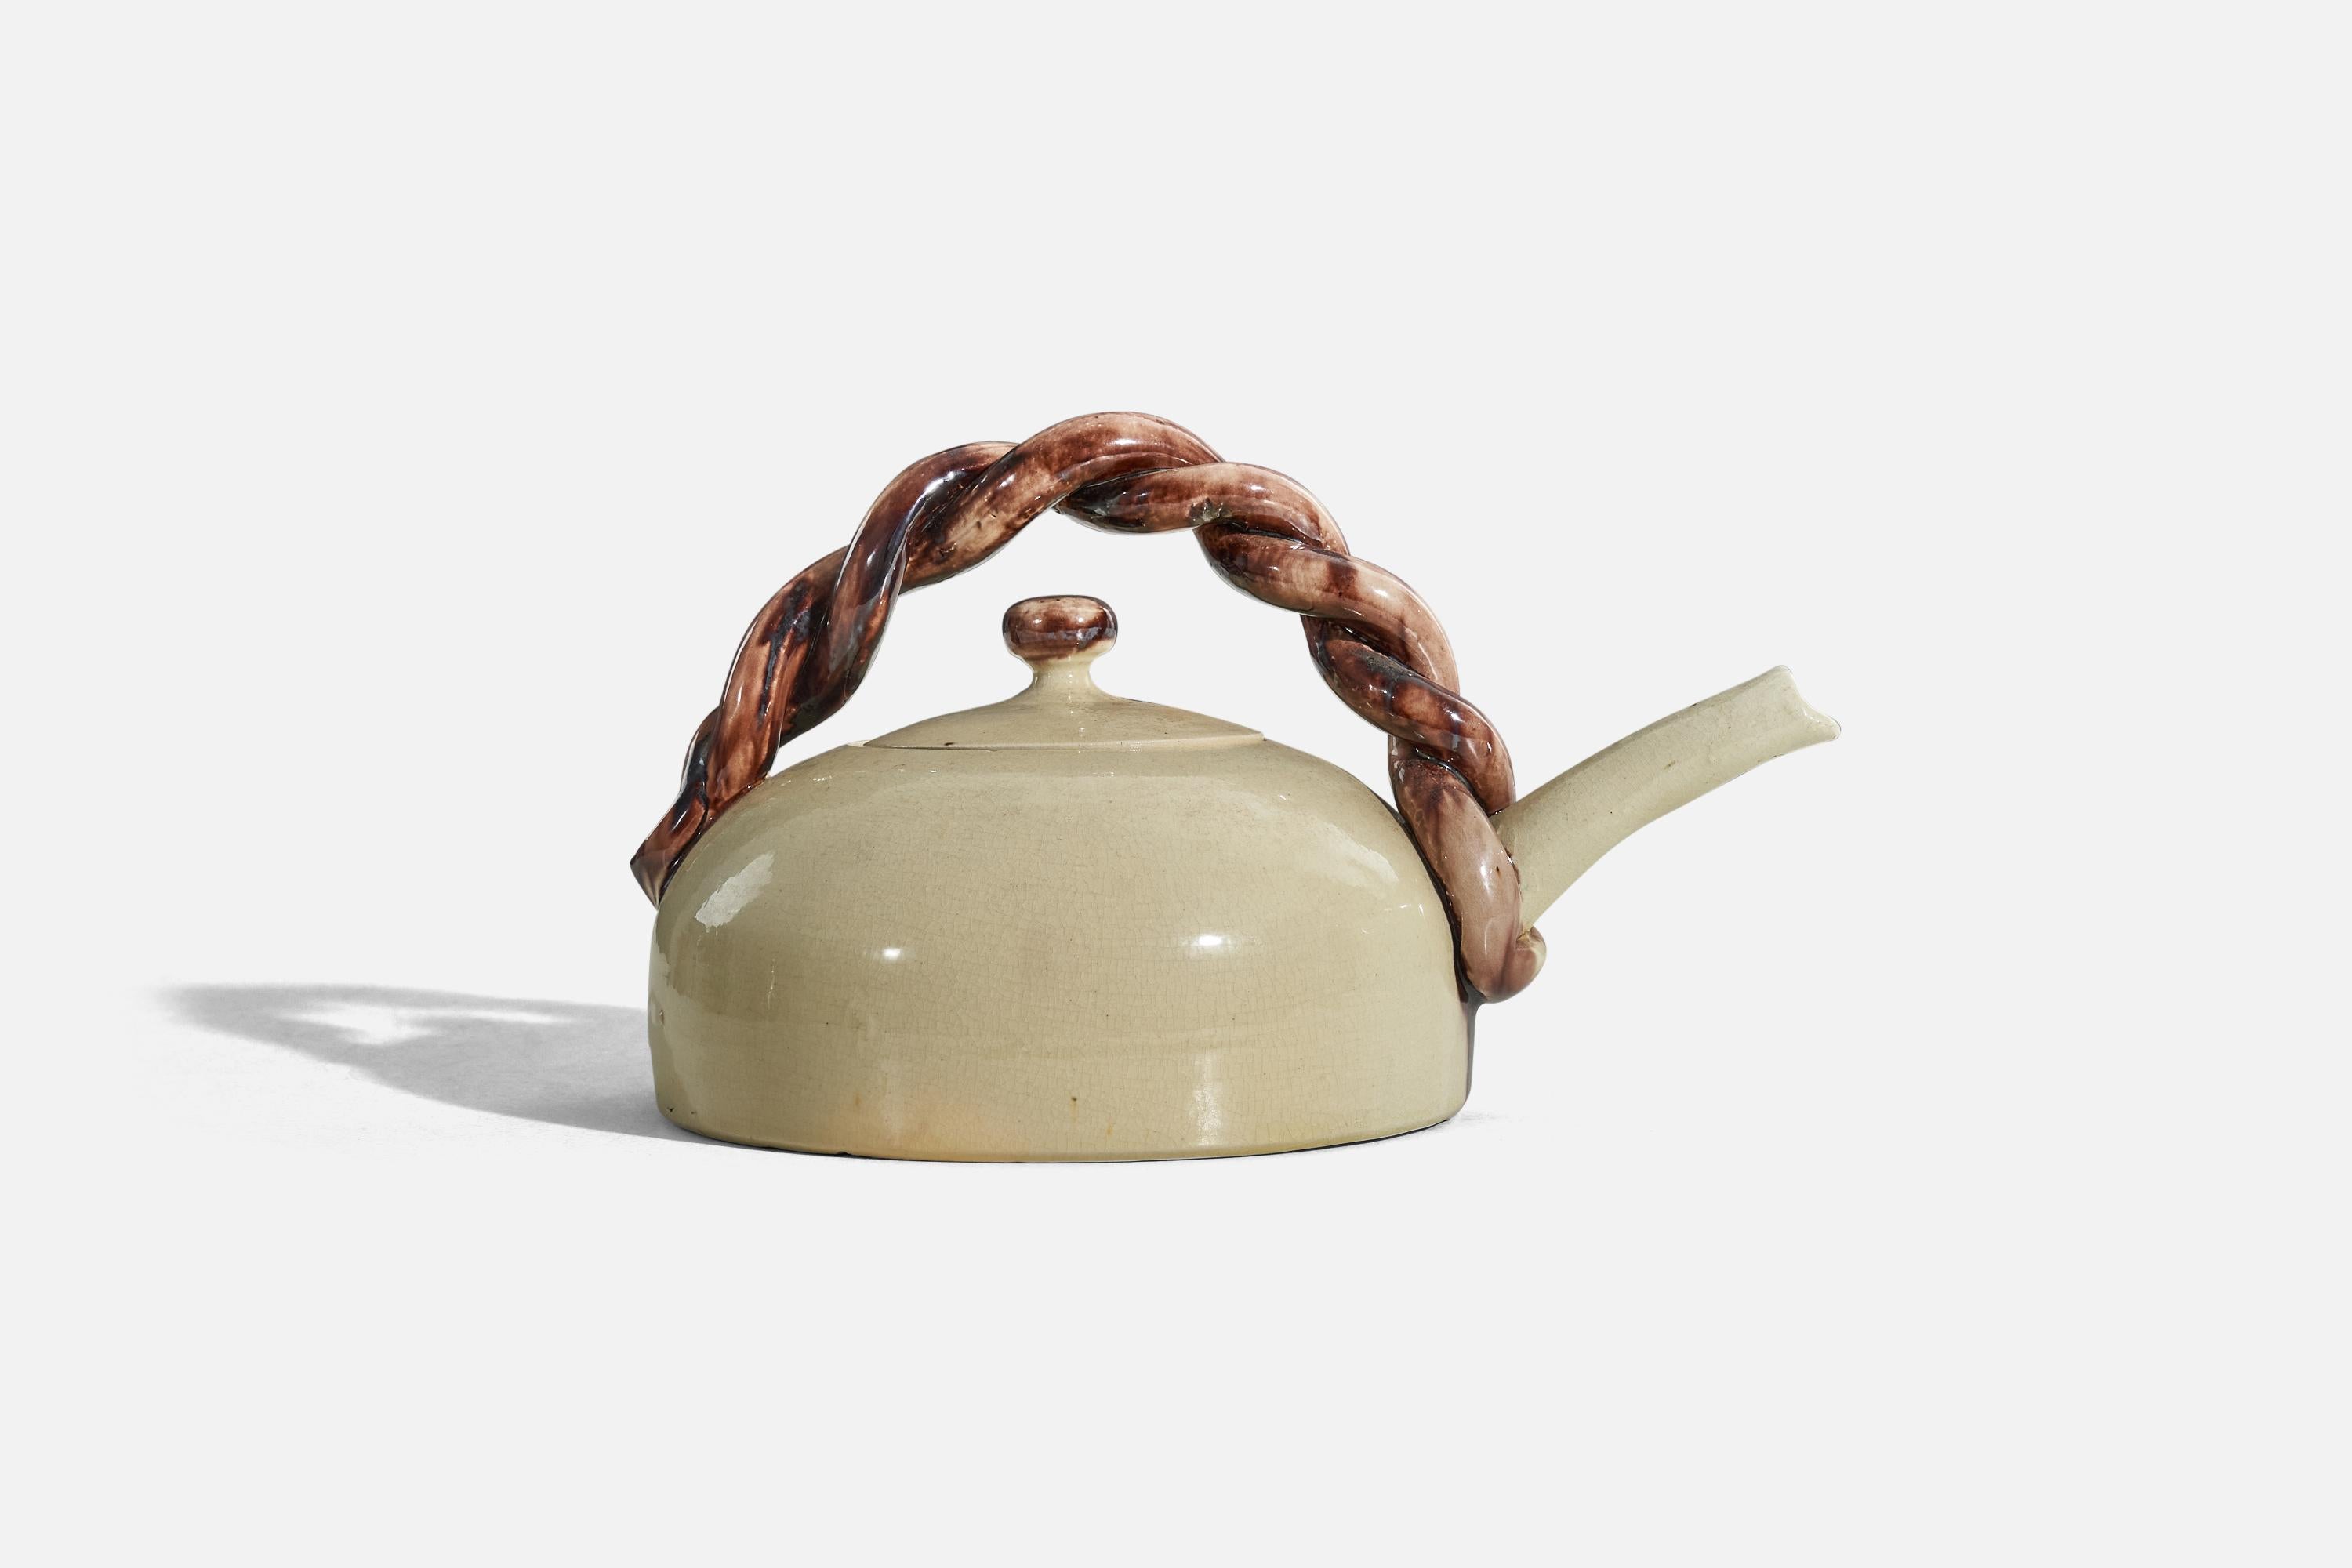 A beige and brown, glazed stoneware teapot designed and produced in Denmark, 1950s.